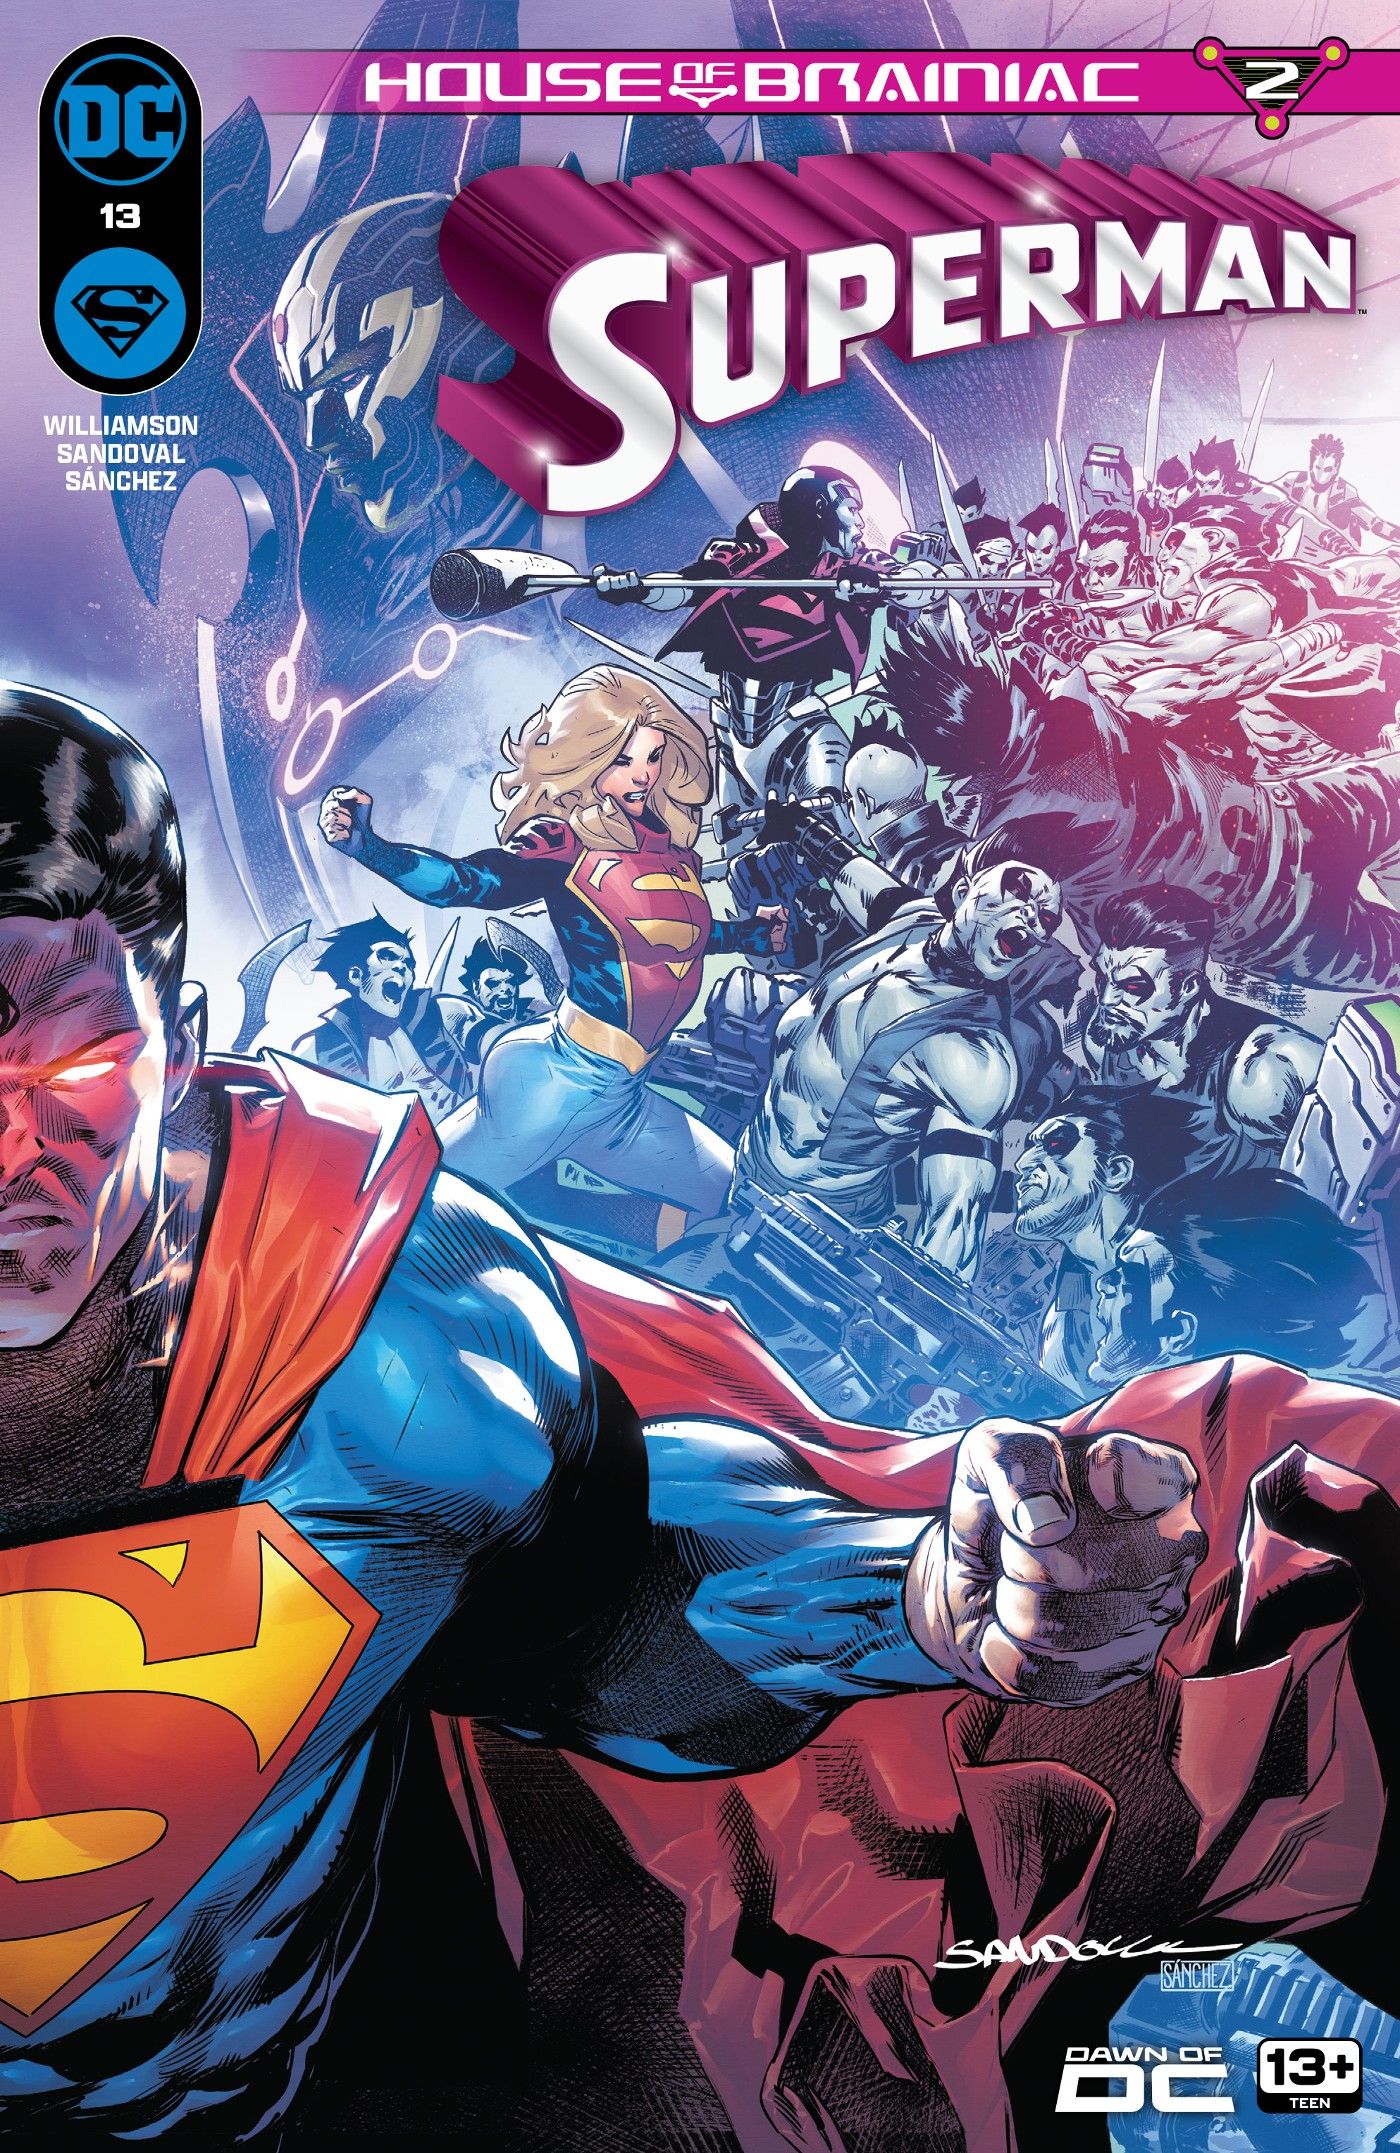 Superman 13 Main Cover: Superman glaring with glowing red eyes. Behind him, Supergirl and Steel fight Czarnians.